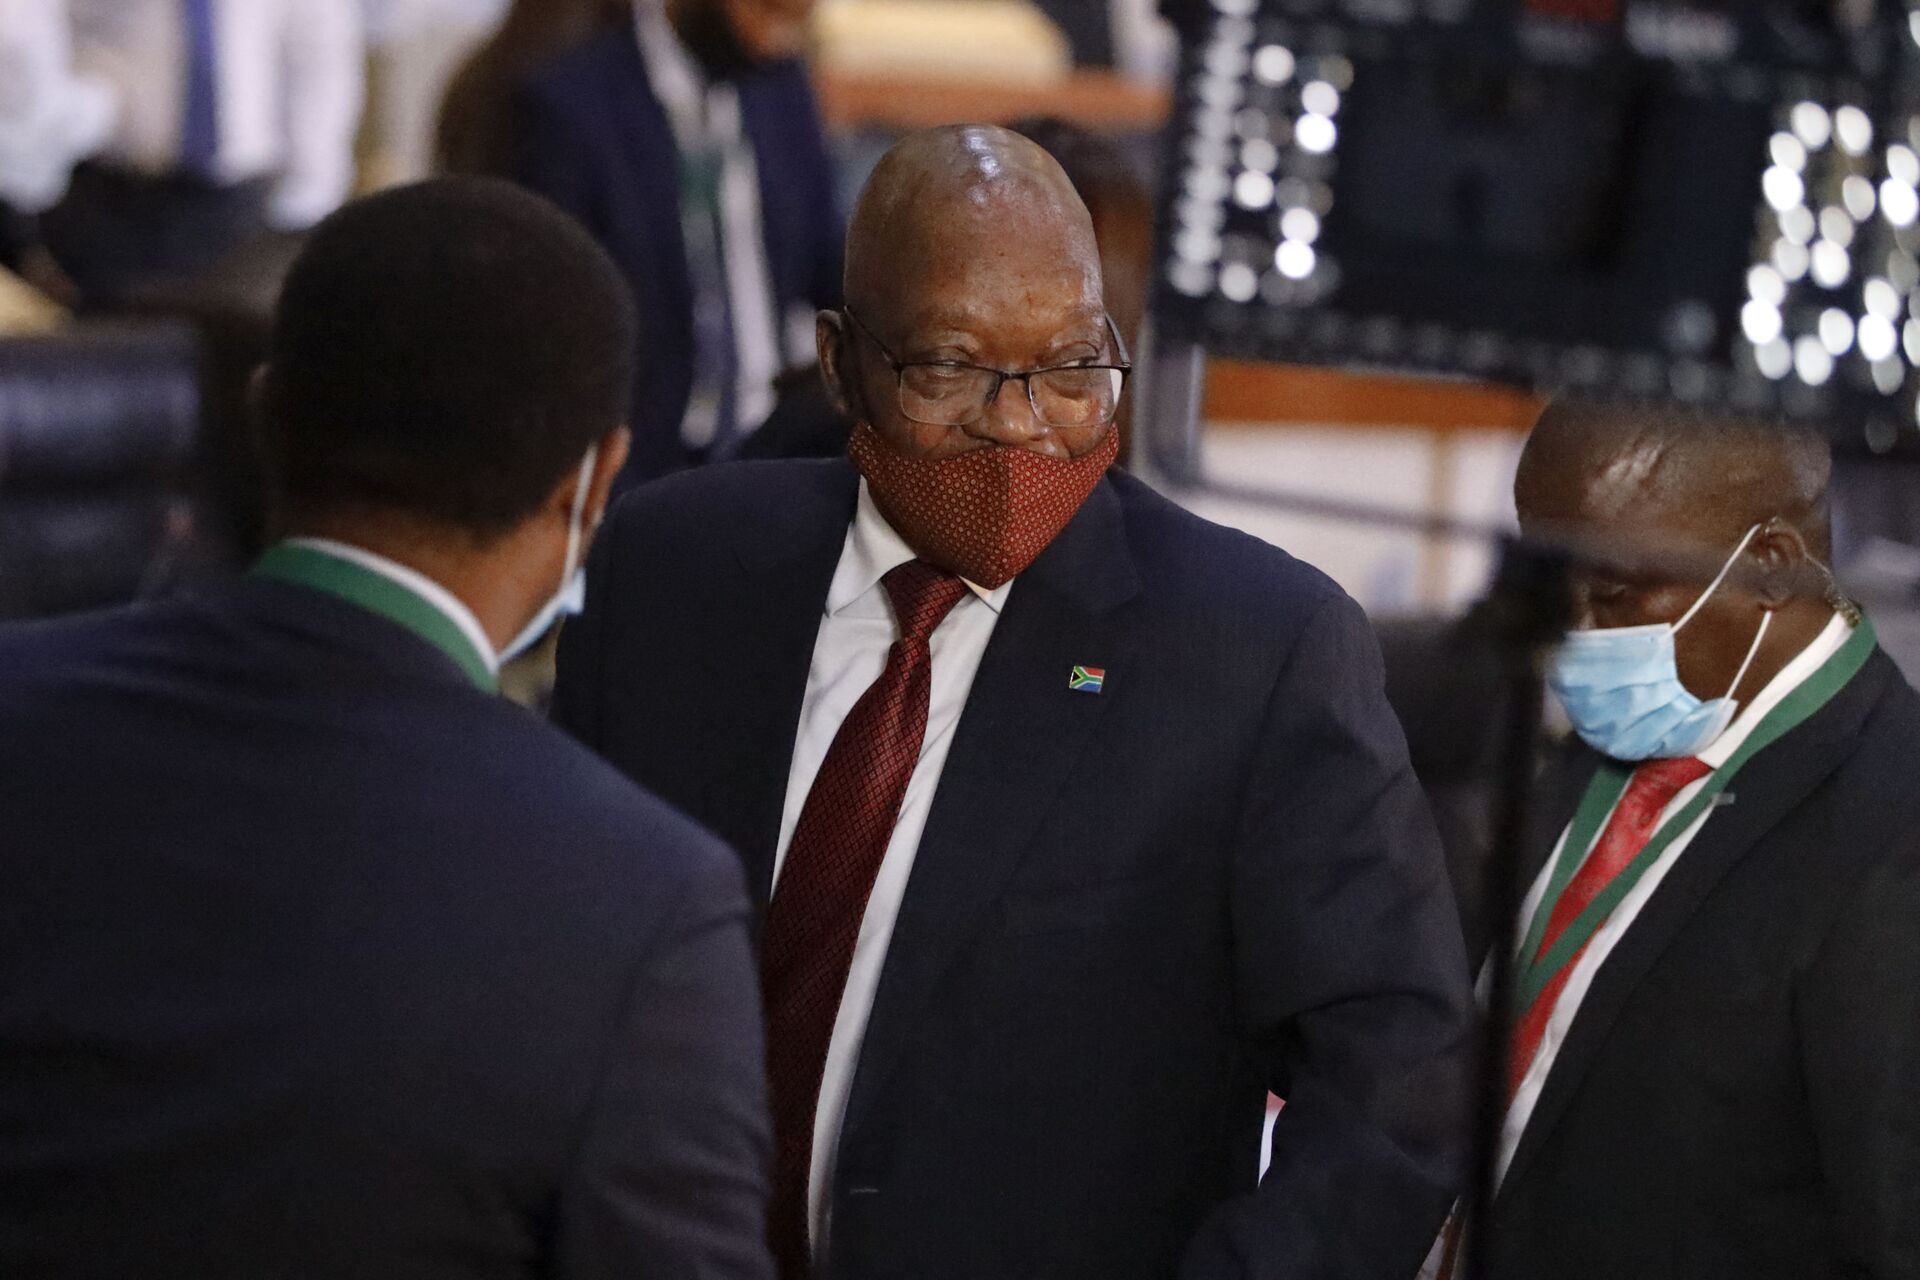 Former South African President Jacob Zuma (C) leaves the Commission of Inquiry into State Capture in Johannesburg during a break on November 16, 2020. - Sputnik International, 1920, 07.09.2021